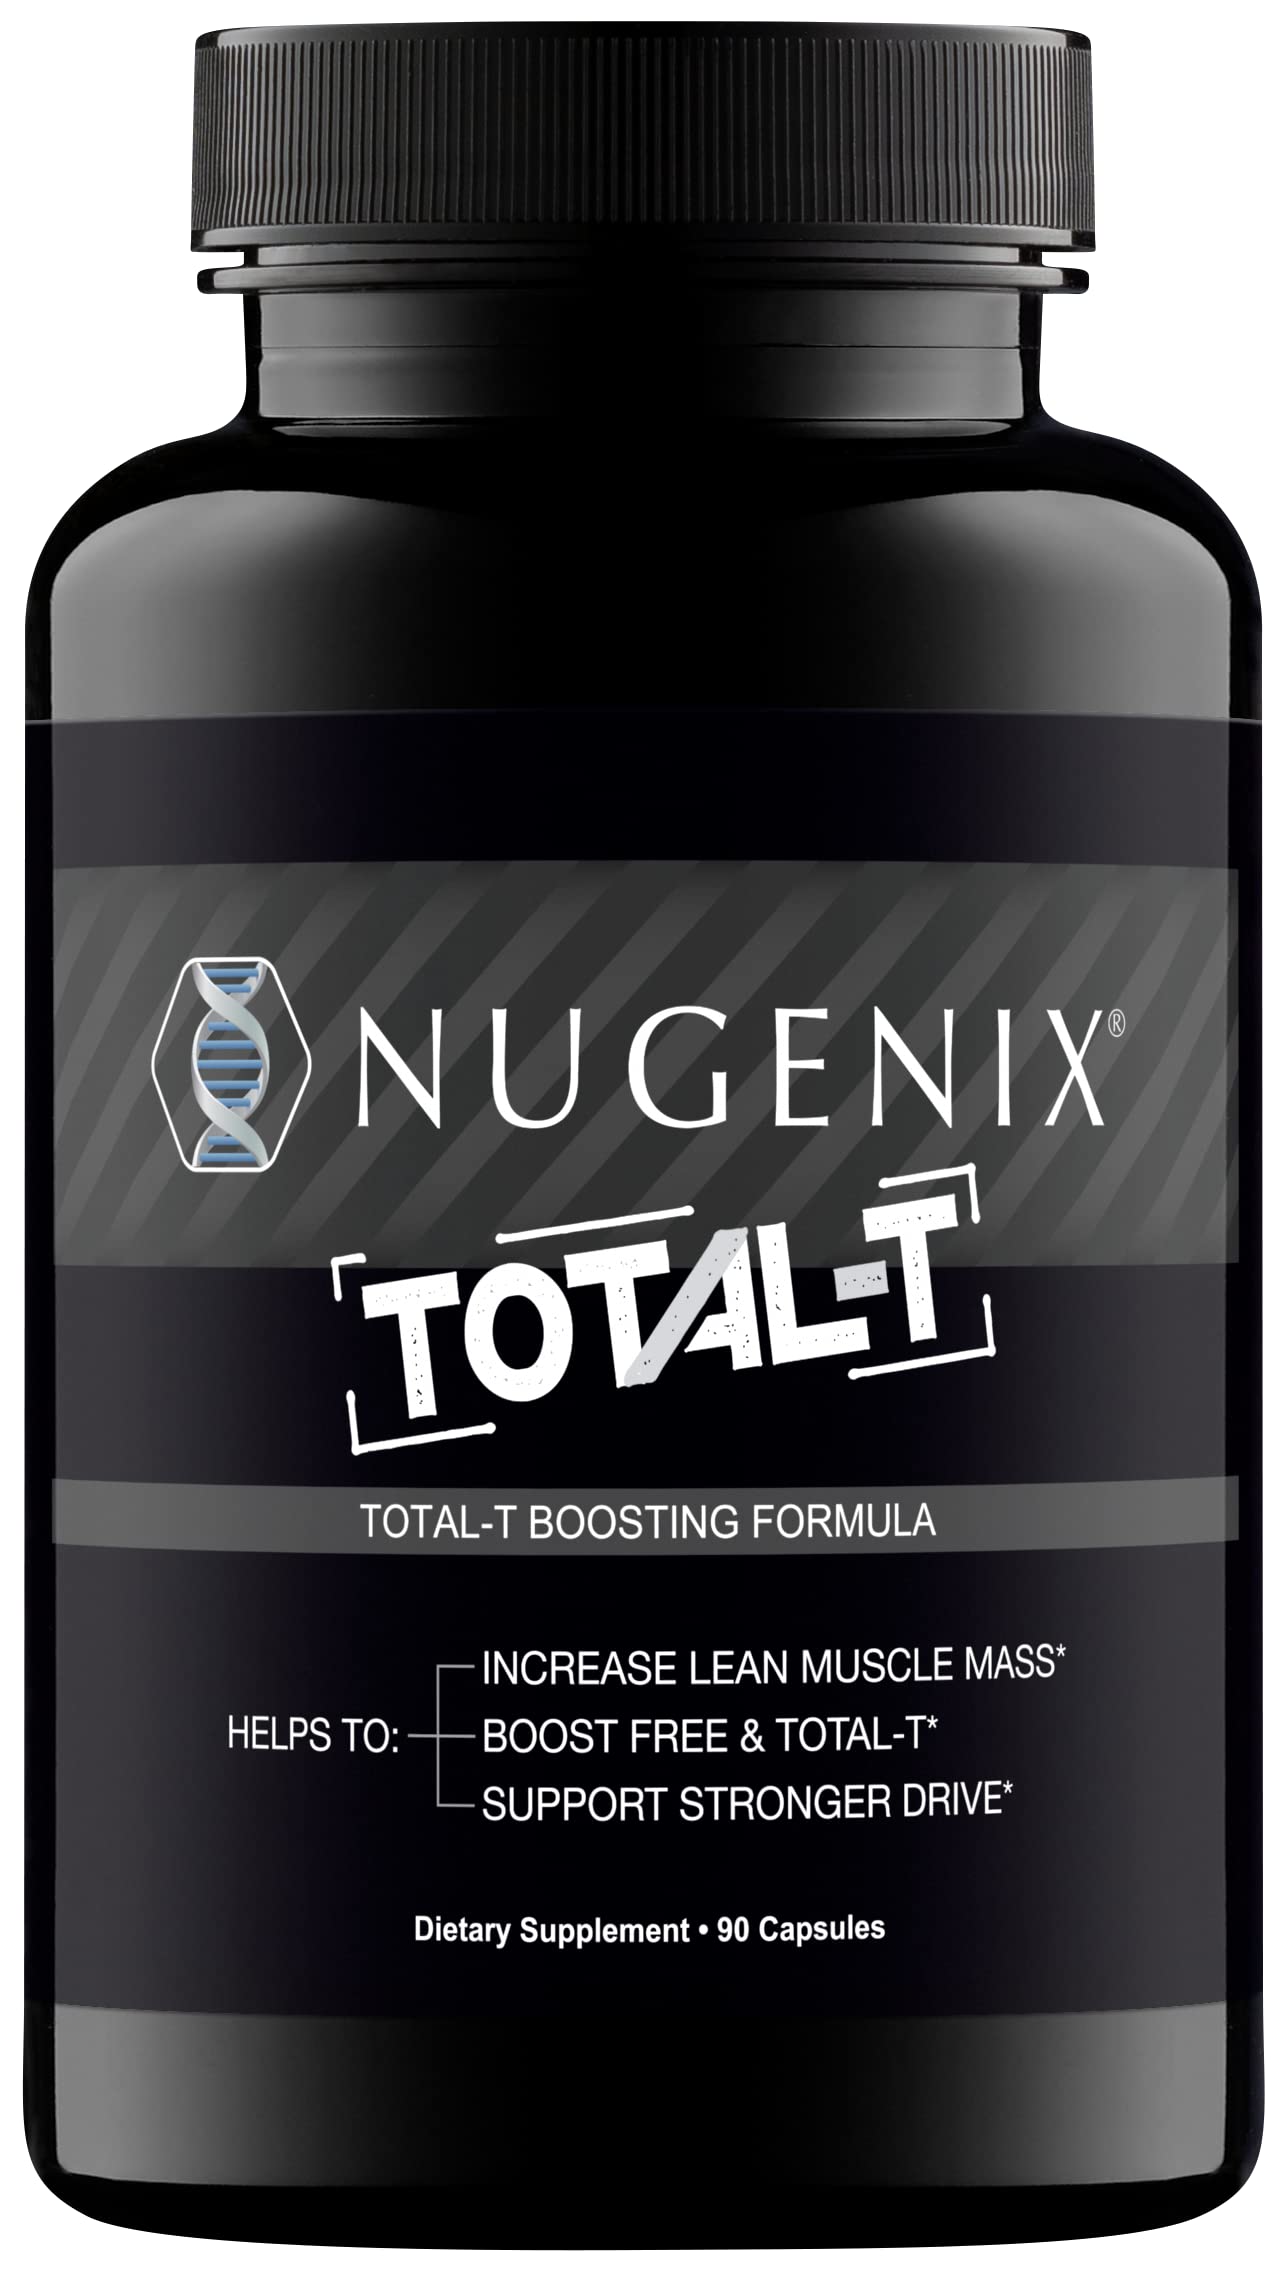 Nugenix Total-T & Vitality Bundle Total-T Free and Total Testosterone Booster & Nugenix Sexual Vitality Booster